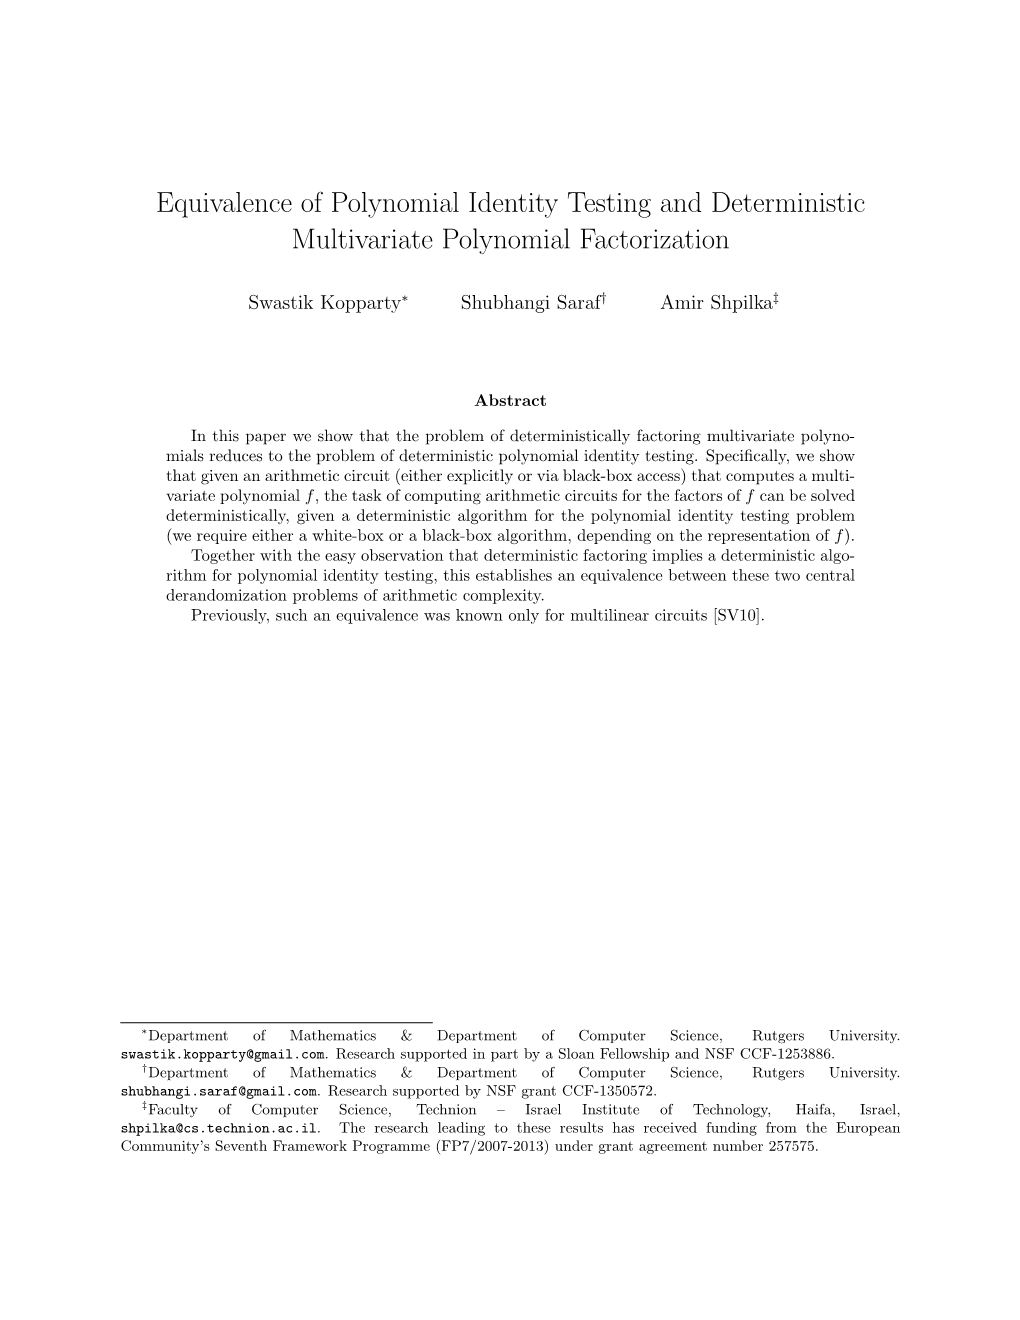 Equivalence of Polynomial Identity Testing and Deterministic Multivariate Polynomial Factorization